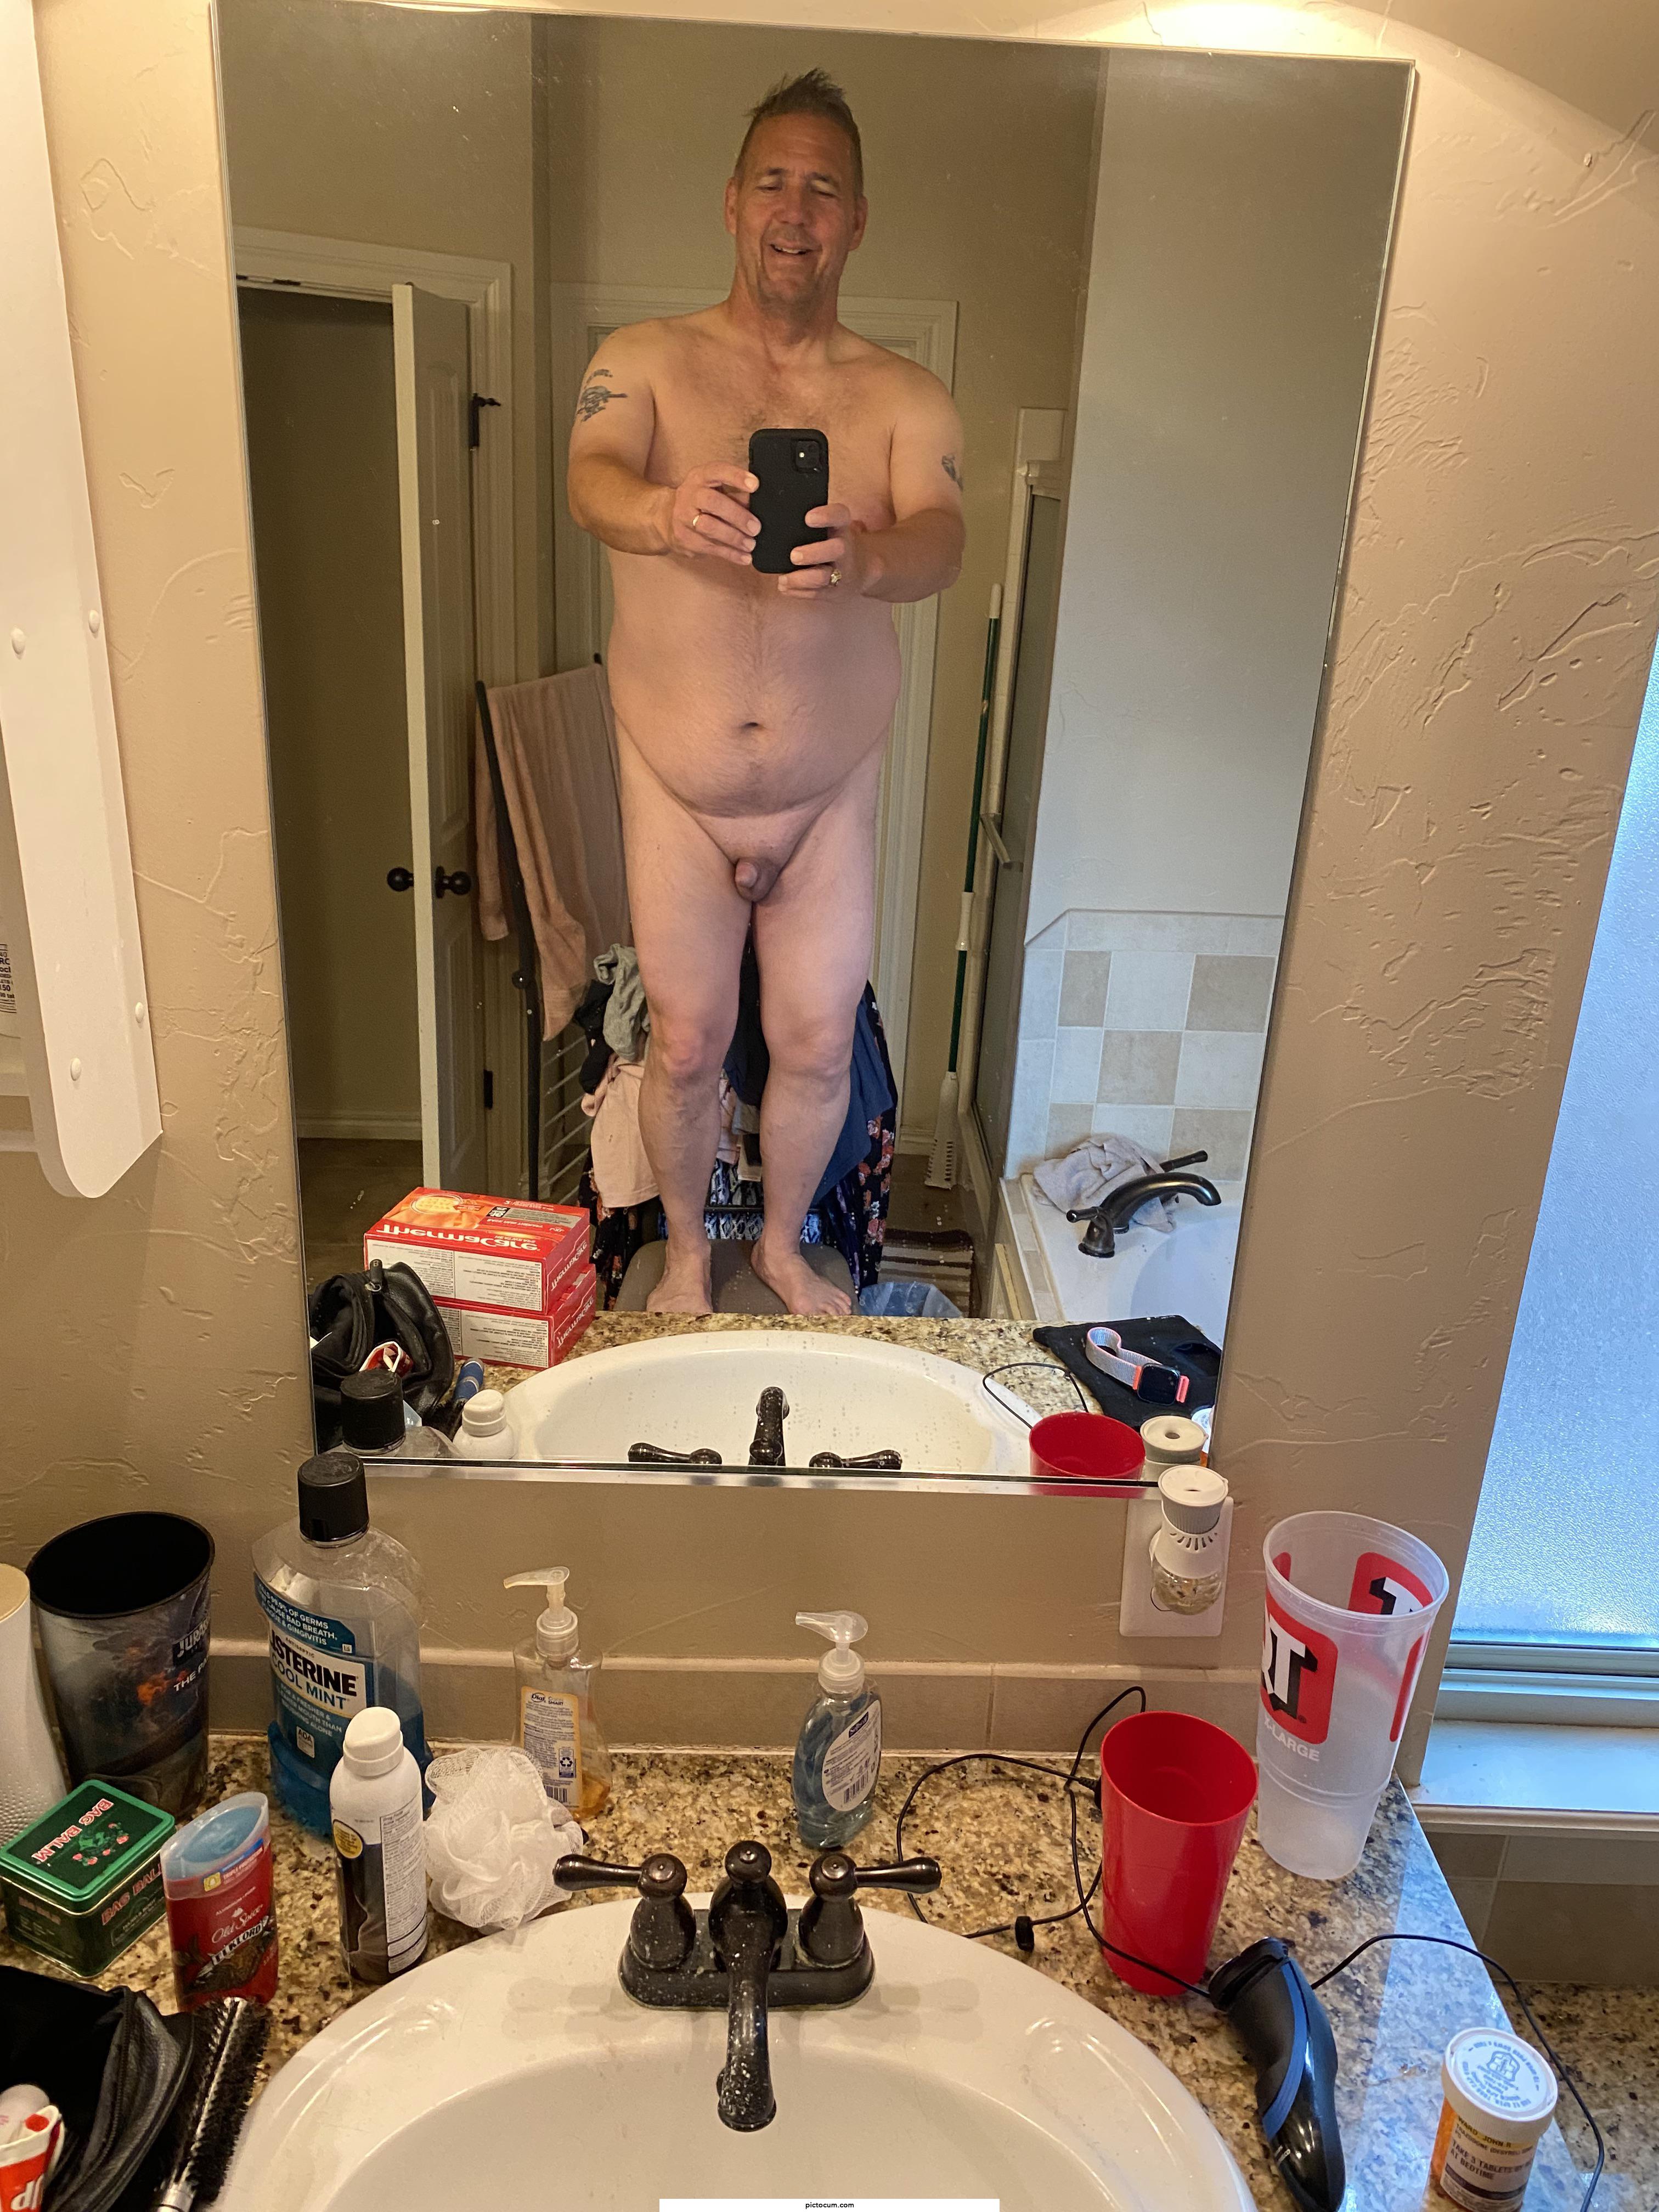 M/55/6’0”/250 Good evening normal nudes! Hope everyone has a great weekend!